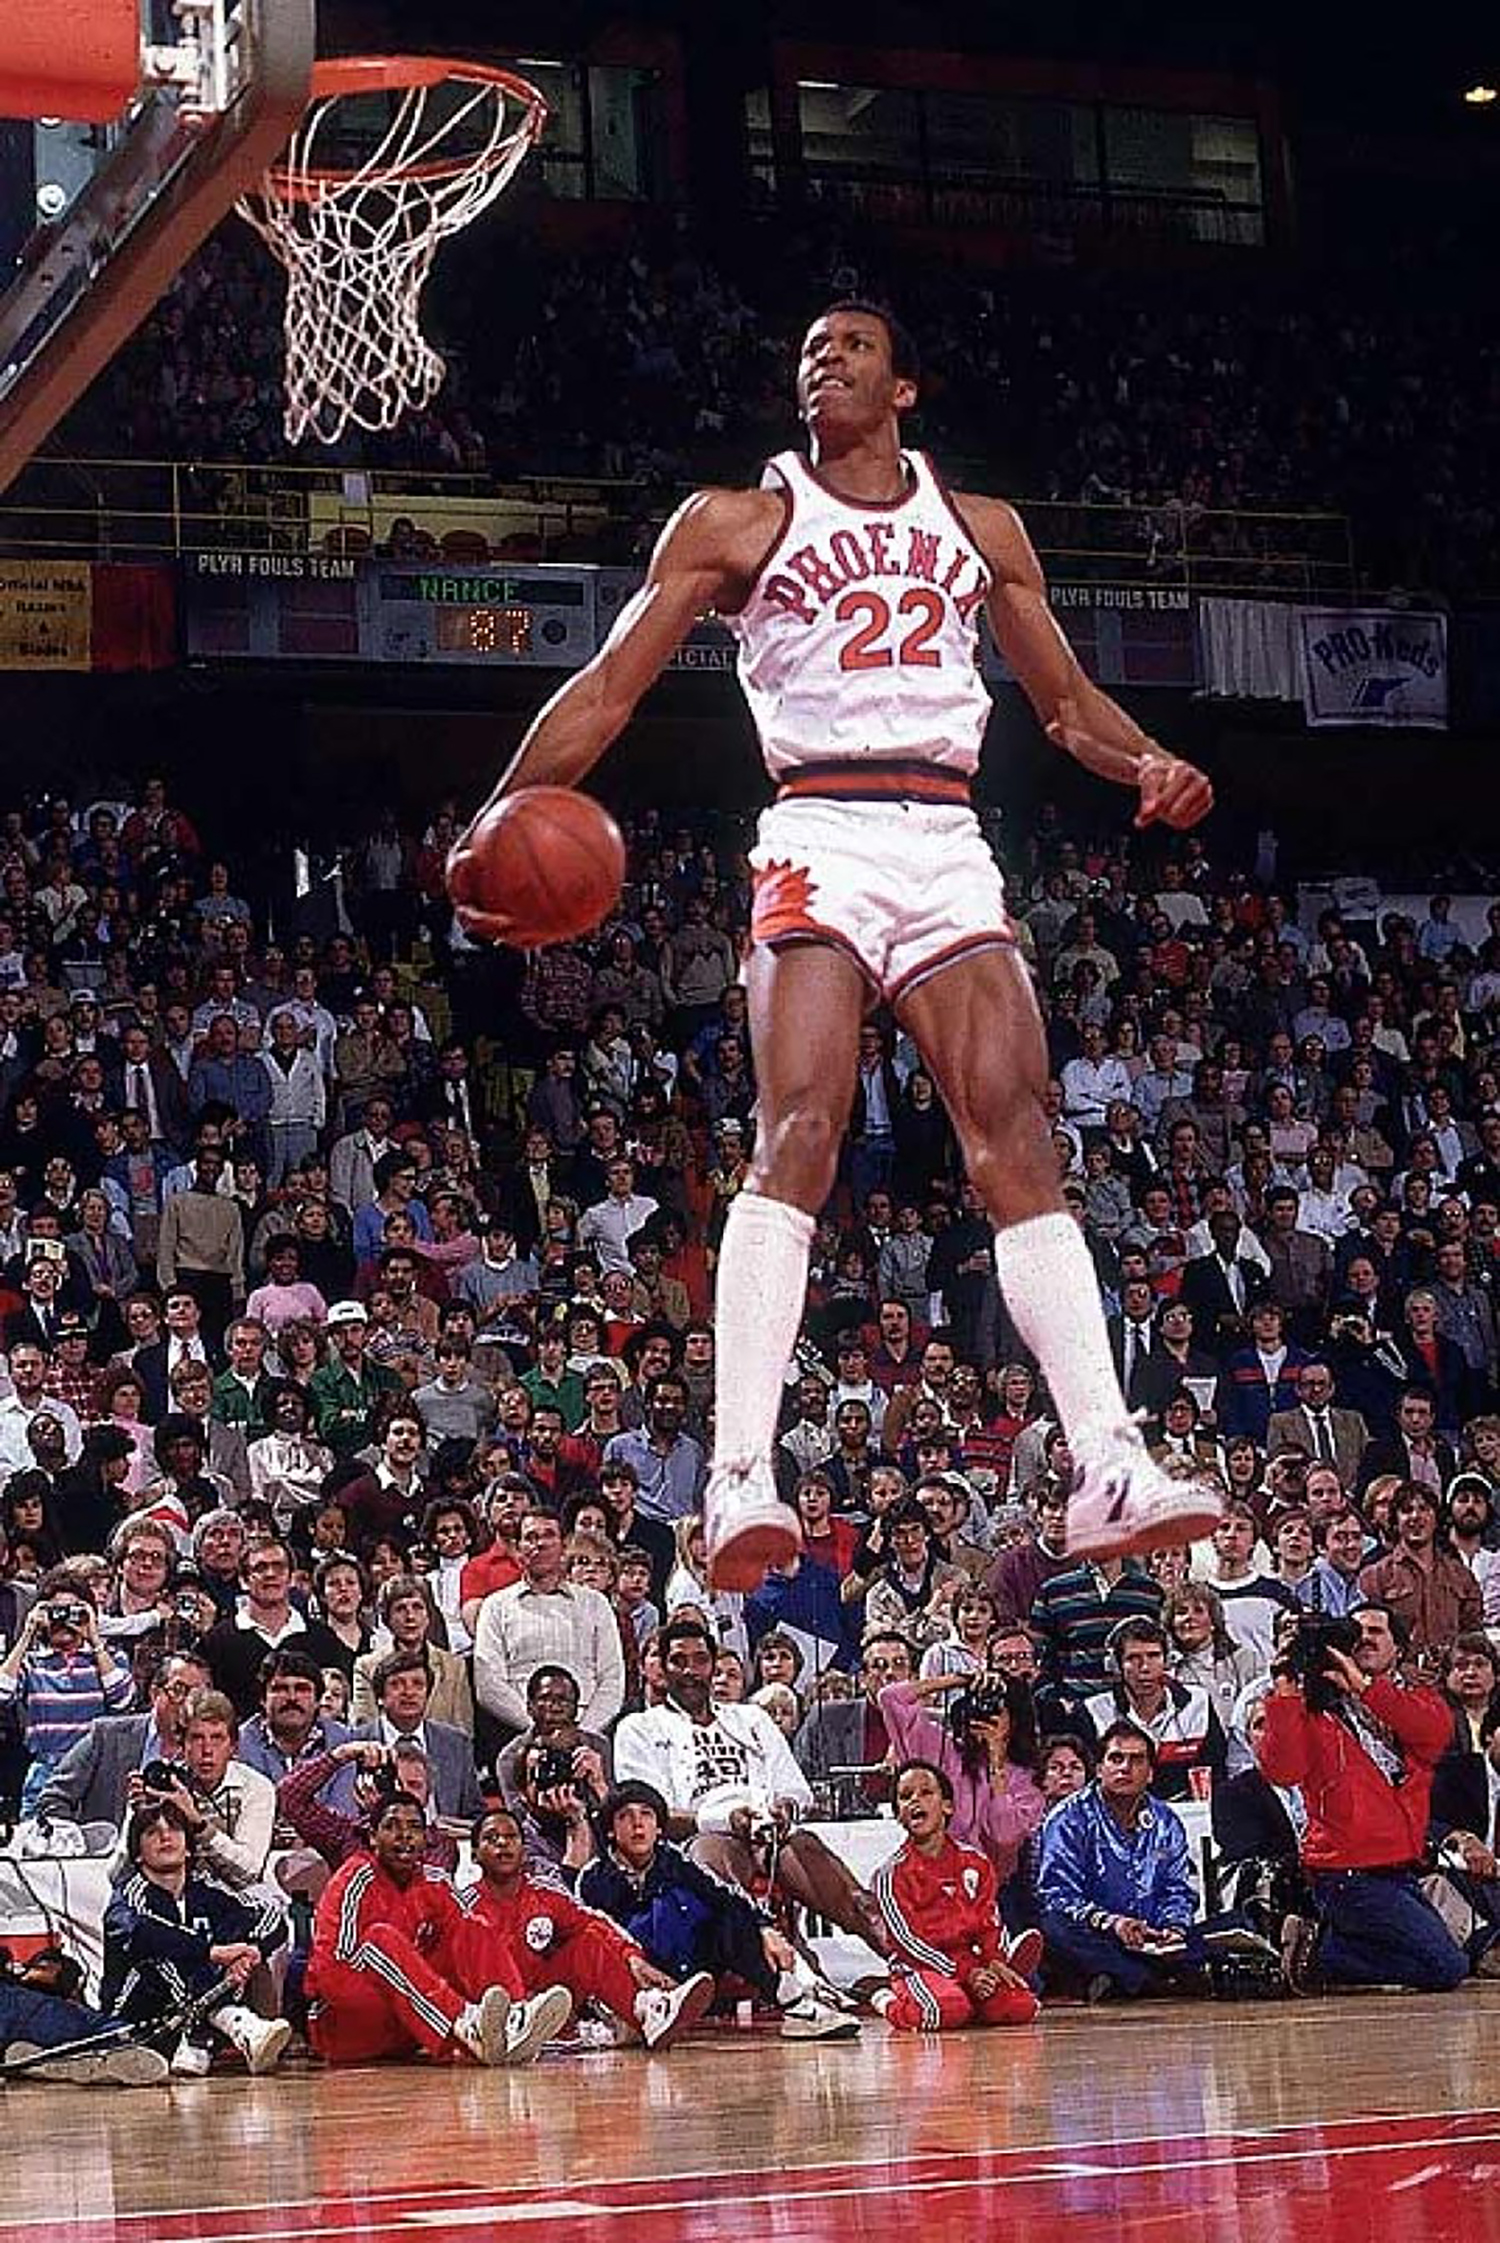 Larry Nance gets some serious air and wins 1st place during the inaugural 1984 Slam Dunk Contest.  This was the first "NBA Slam Dunk Contest"  and it did not take place until 8 years after the ABA and the NBA merger in 1976.